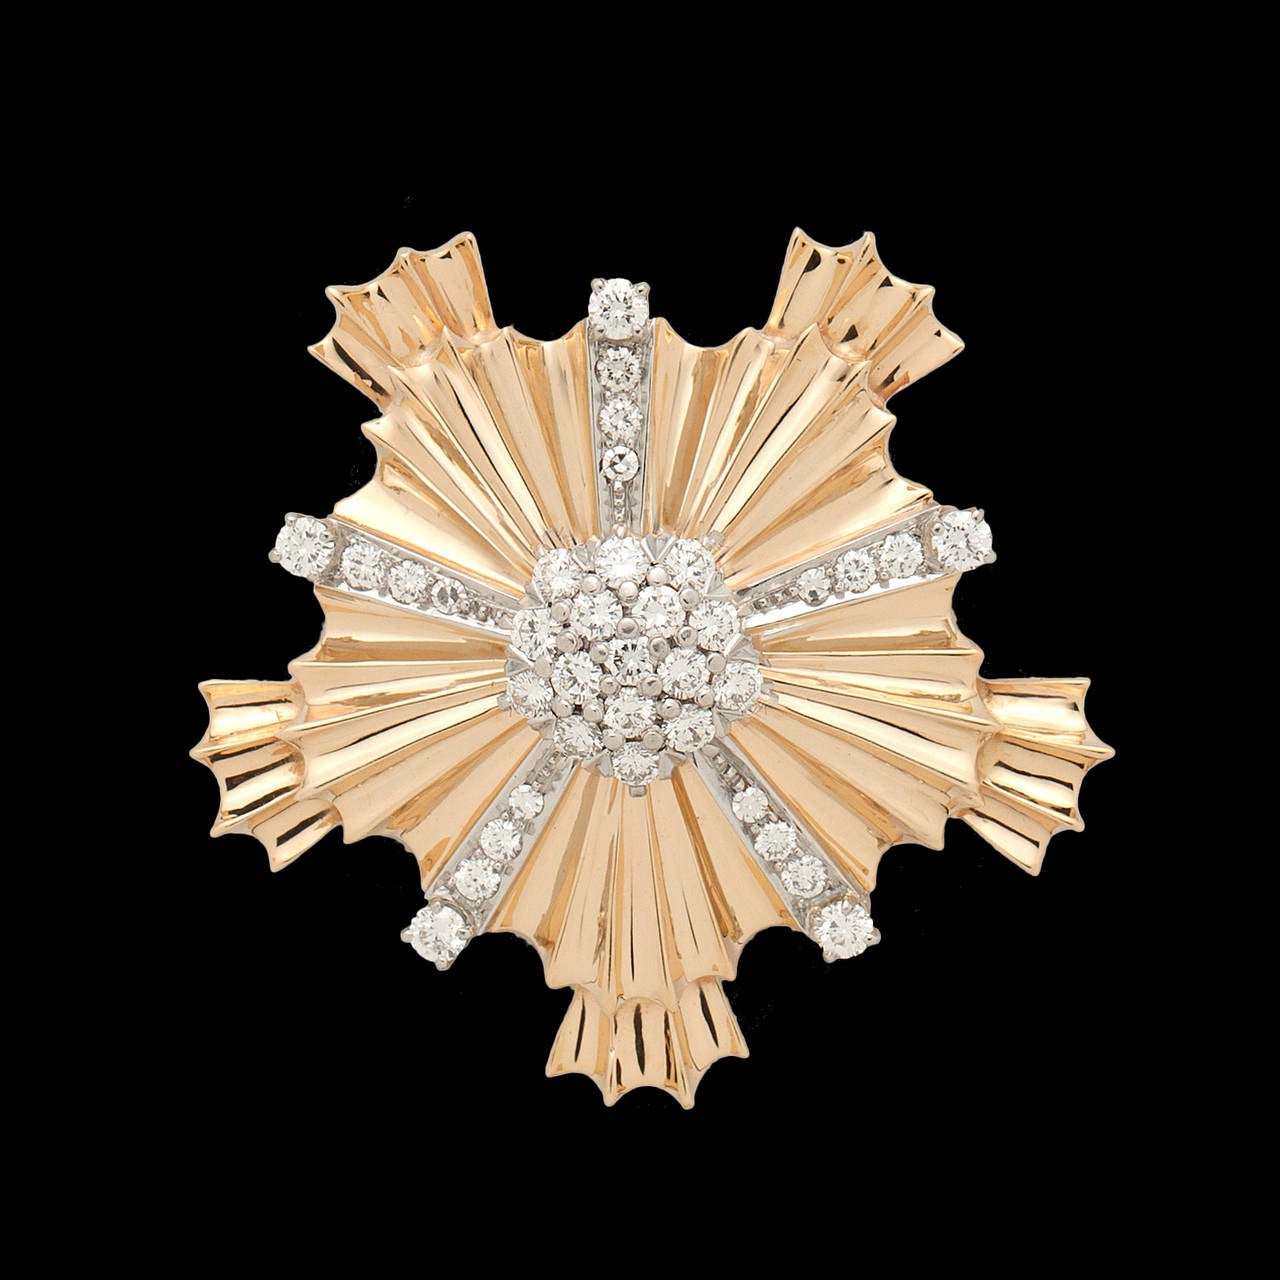 Tiffany & Co. 18Kt Yellow Gold Folded Ribbon Brooch Features 36 Round Brilliant Cut Diamonds for a Total Diamond Weight of approximately 1.92cts. The brooch weighs 21.9 grams.